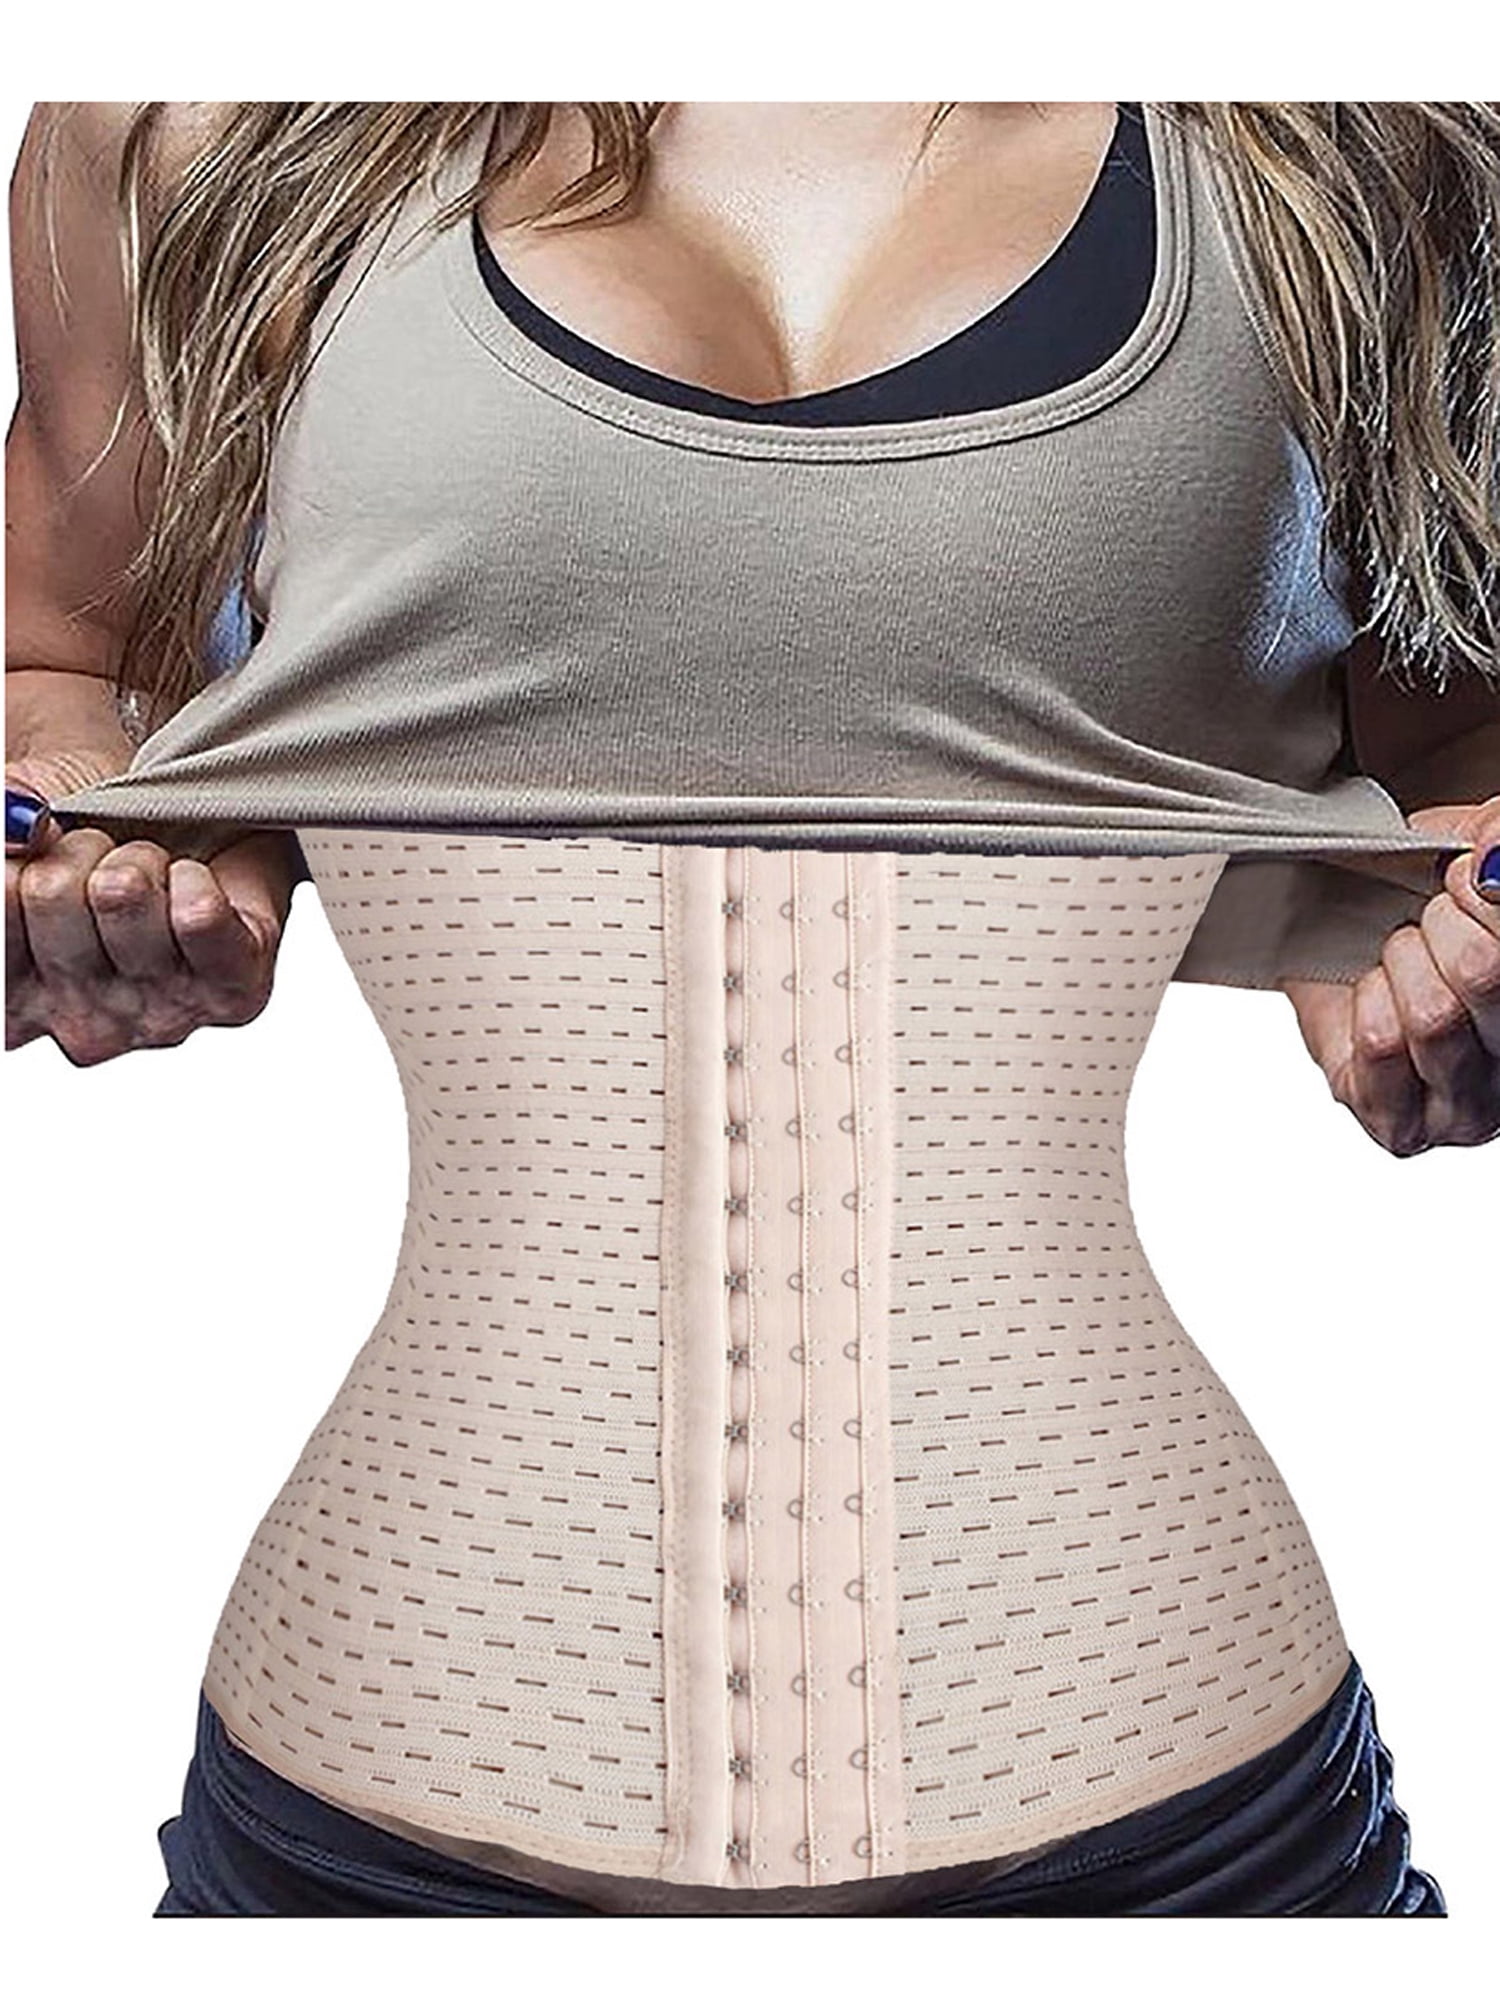 Youloveit Slimming Body Shape Waist Coach And Shaper 3 Breasted Belt Female  Corset Corset Tights Control Body Buttocks Lifting Plus Size 